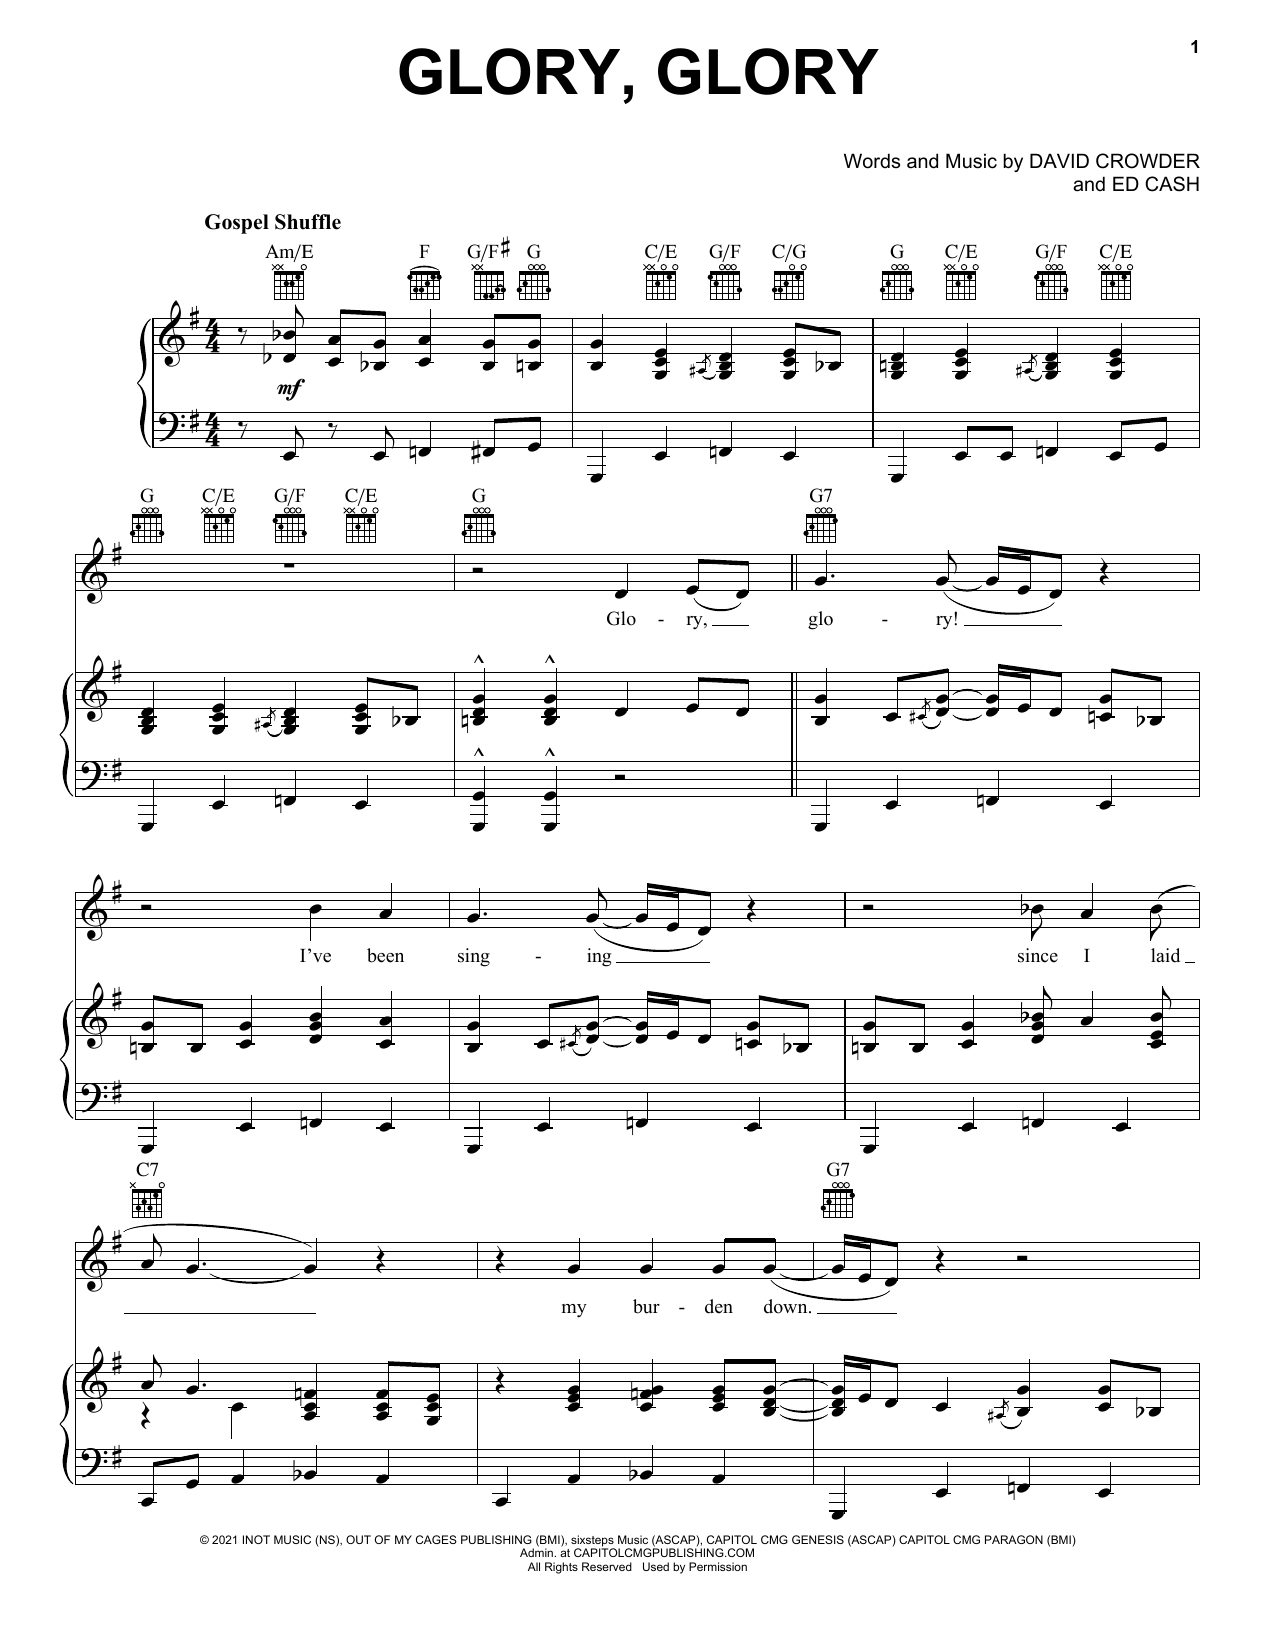 Download Crowder Glory Glory (God Is Able) Sheet Music